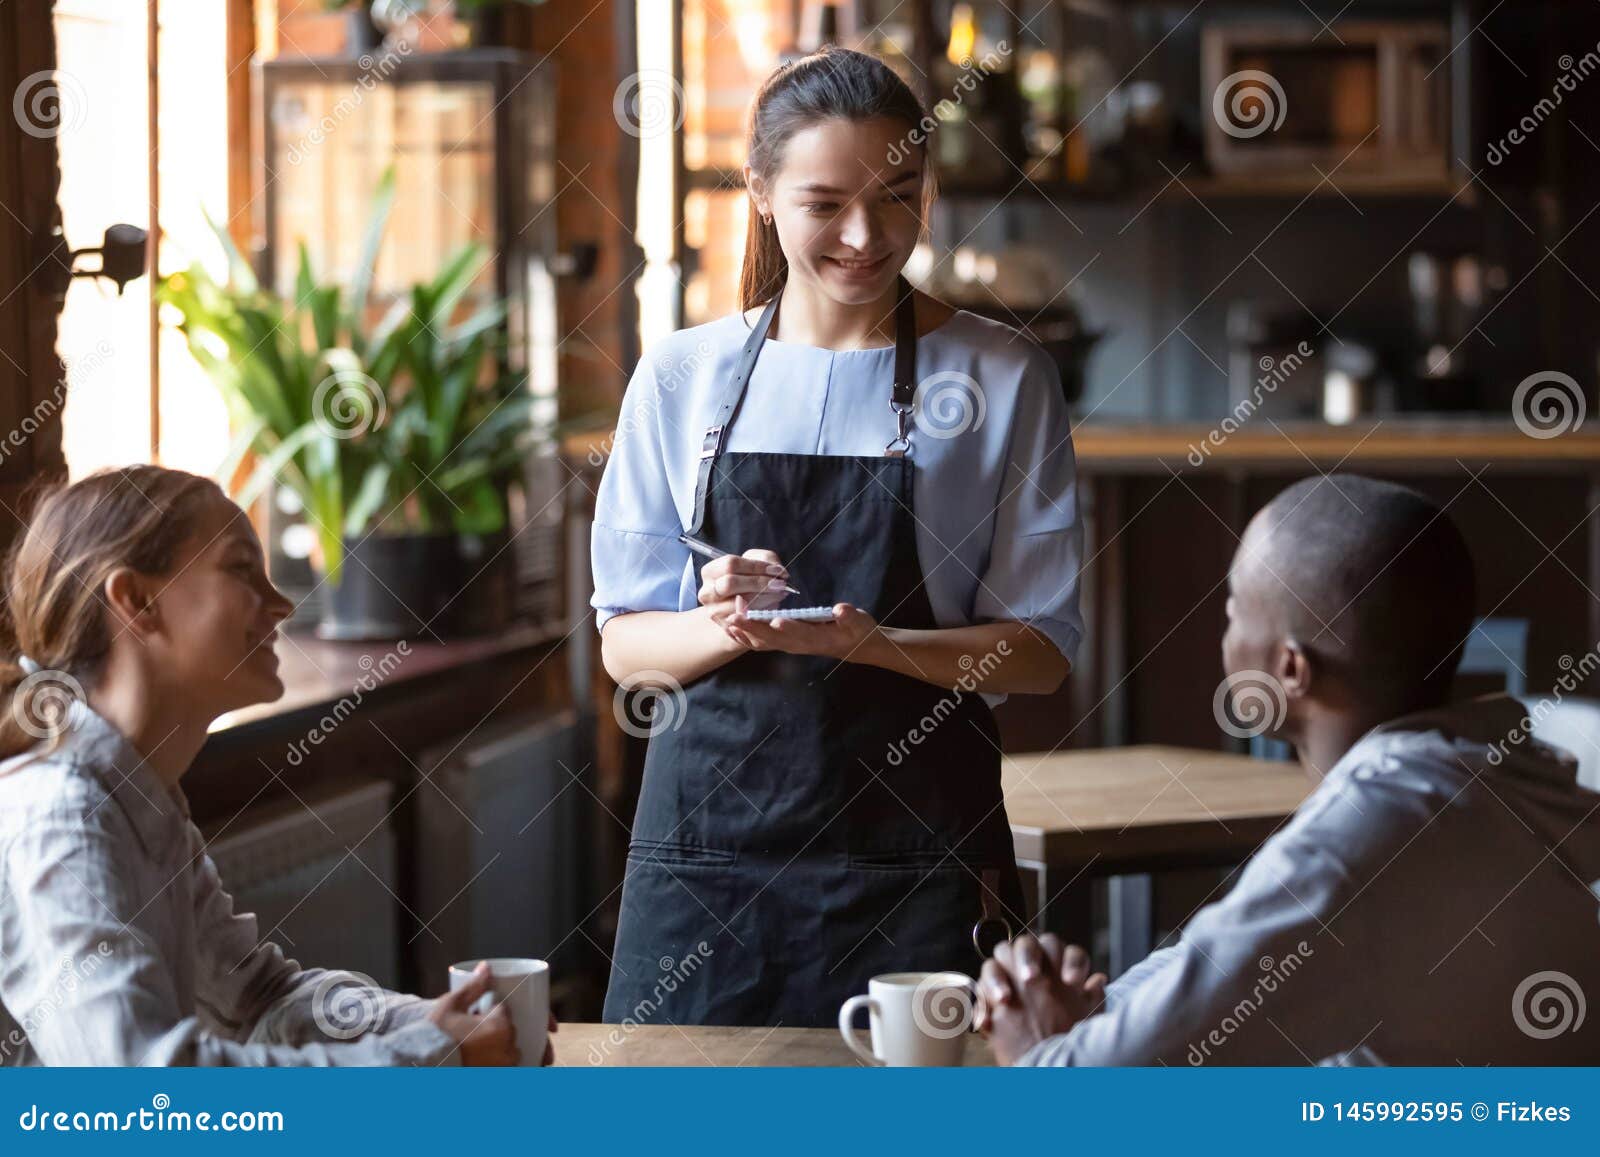 Waitress Welcoming Restaurant Guests Take Order Writing On Notepad Stock Image Image Of